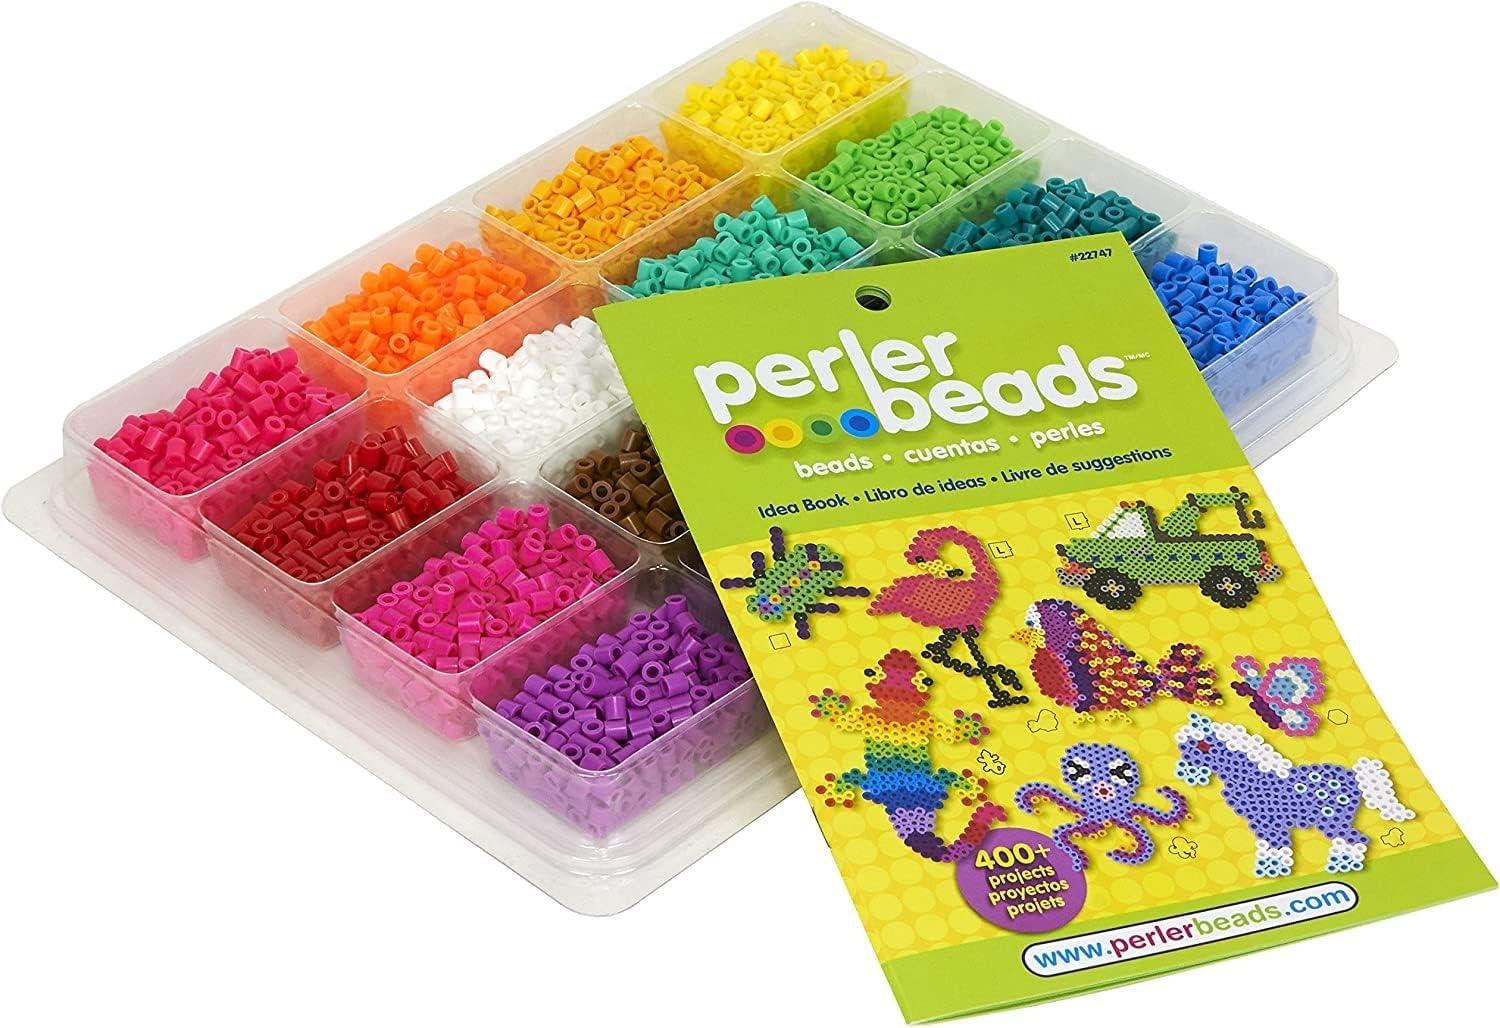 Perler 17605 Assorted Fuse Beads Kit with Storage Tray and Pattern Book for  Arts and Crafts, Multicolor, 4001pcs